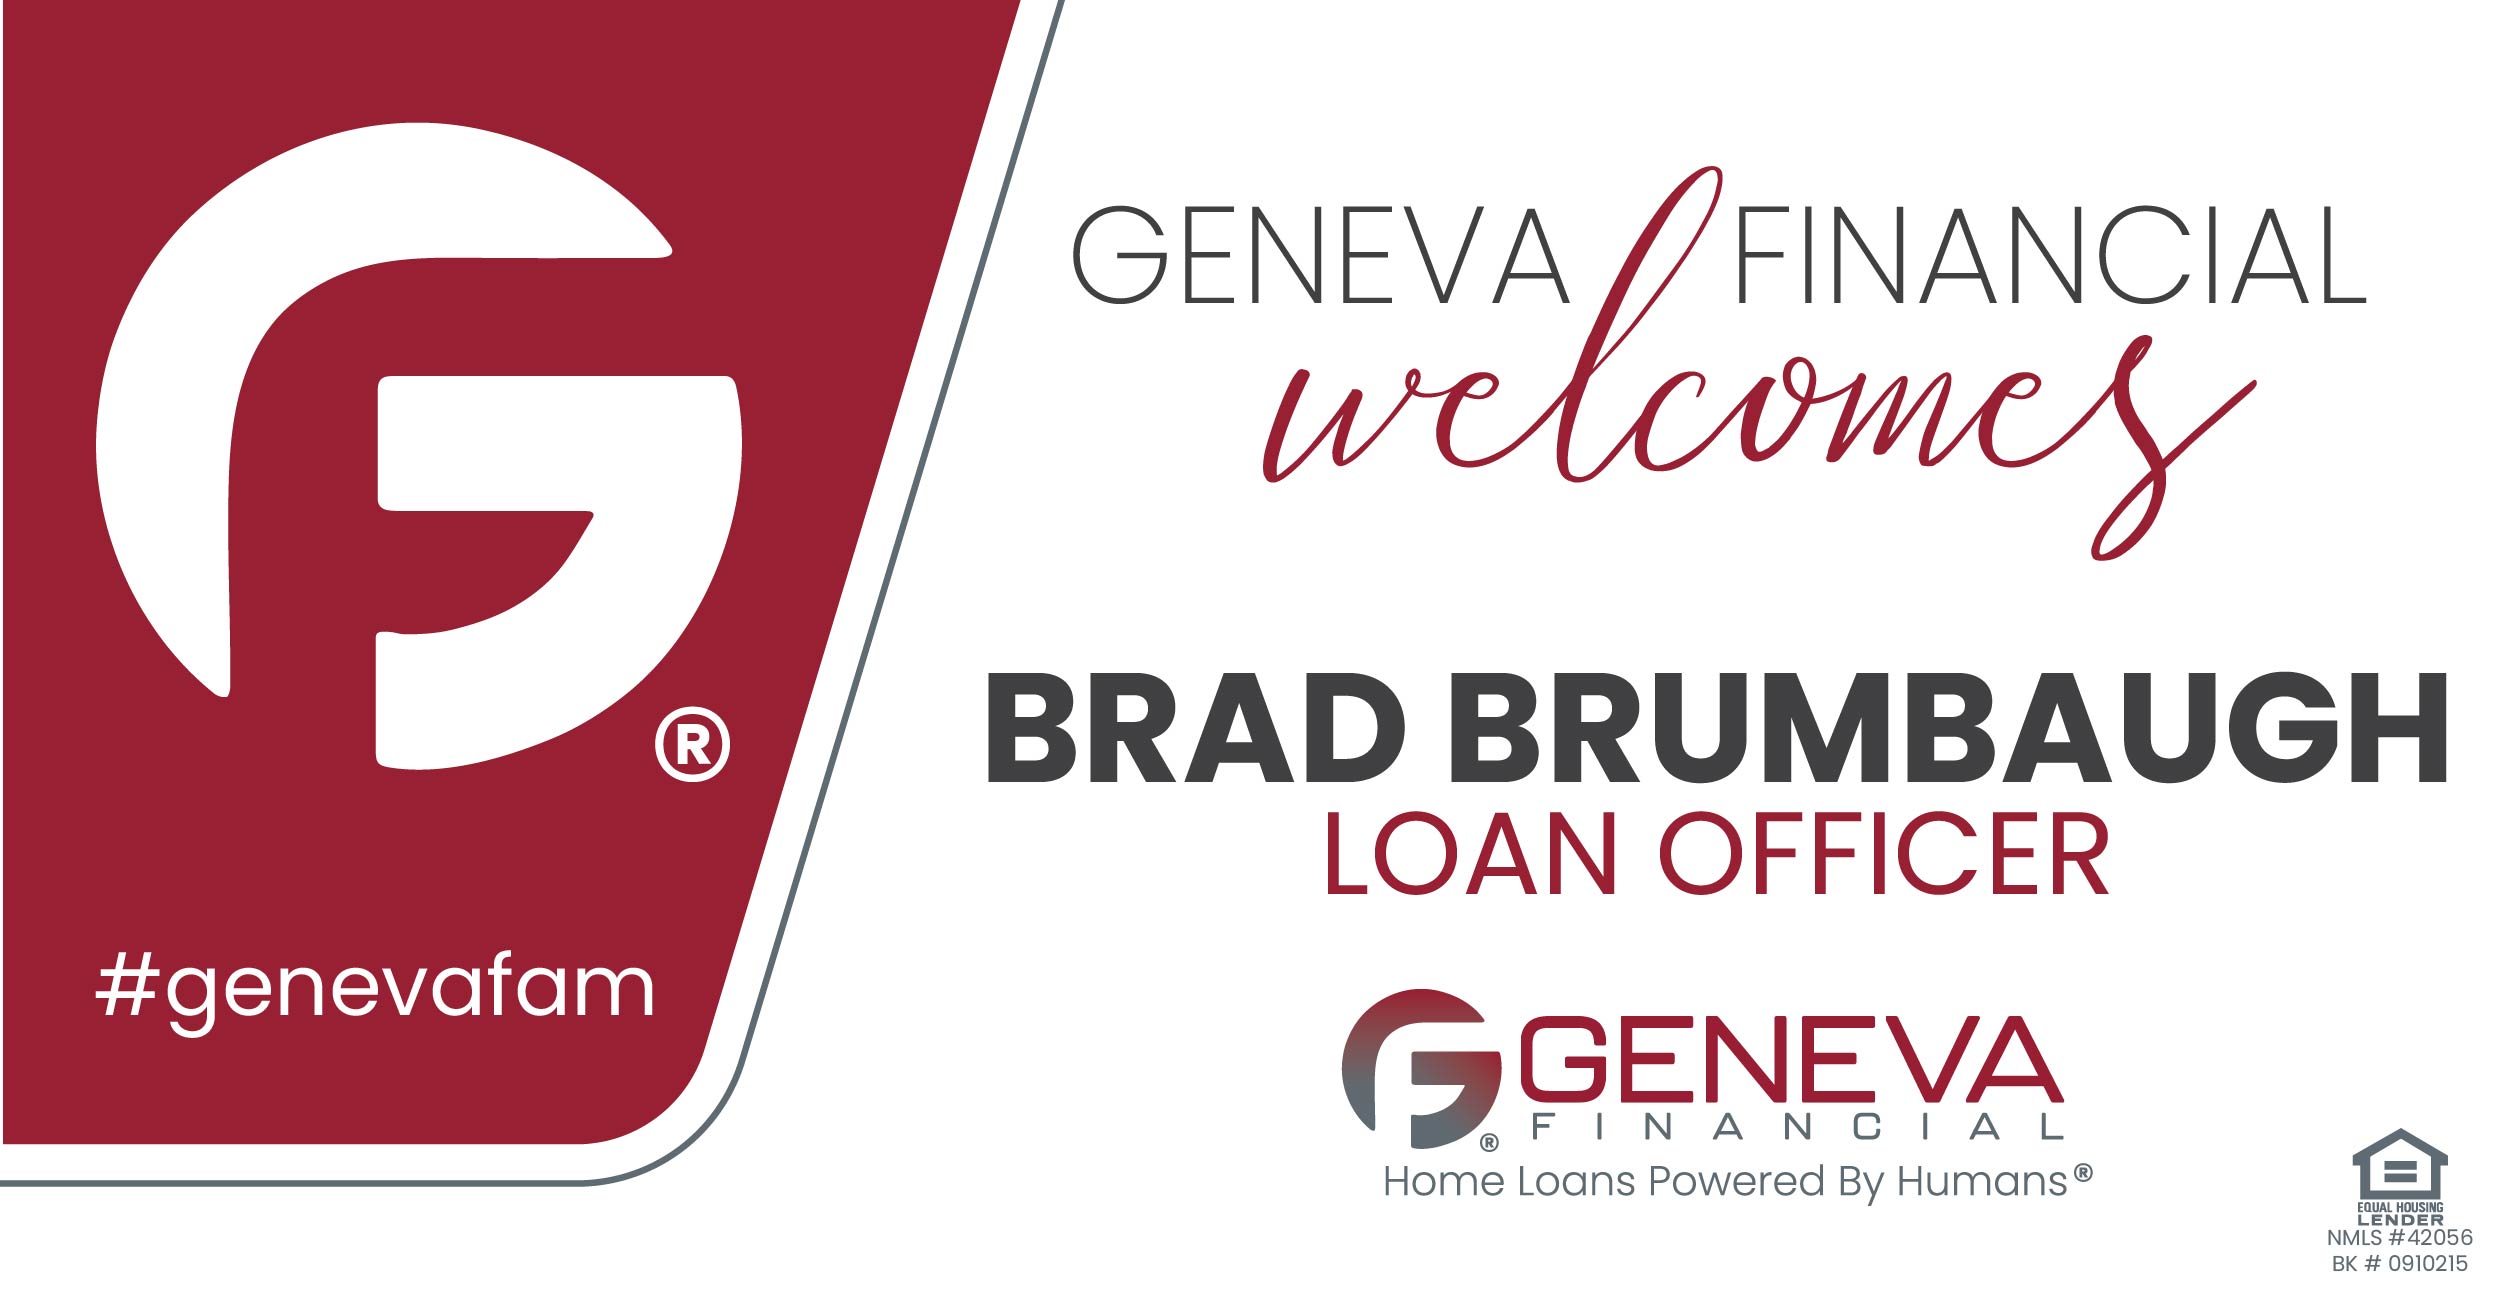 Geneva Financial Home Loans Welcomes Loan Officer Brad Brumbaugh to St. Louis, Missouri Market – Home Loans Powered by Humans®.